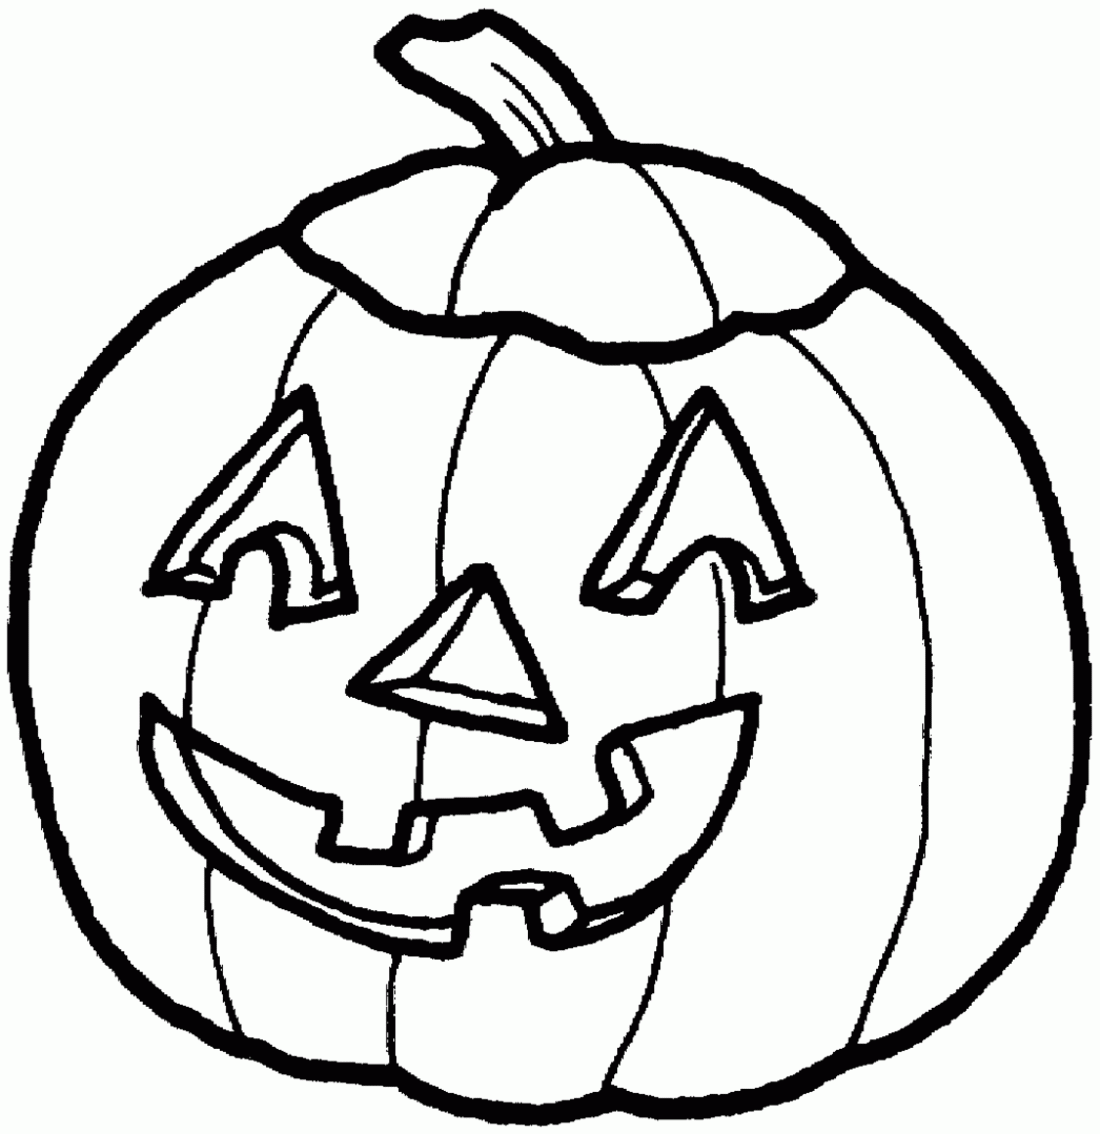 camping pumpkins coloring pages